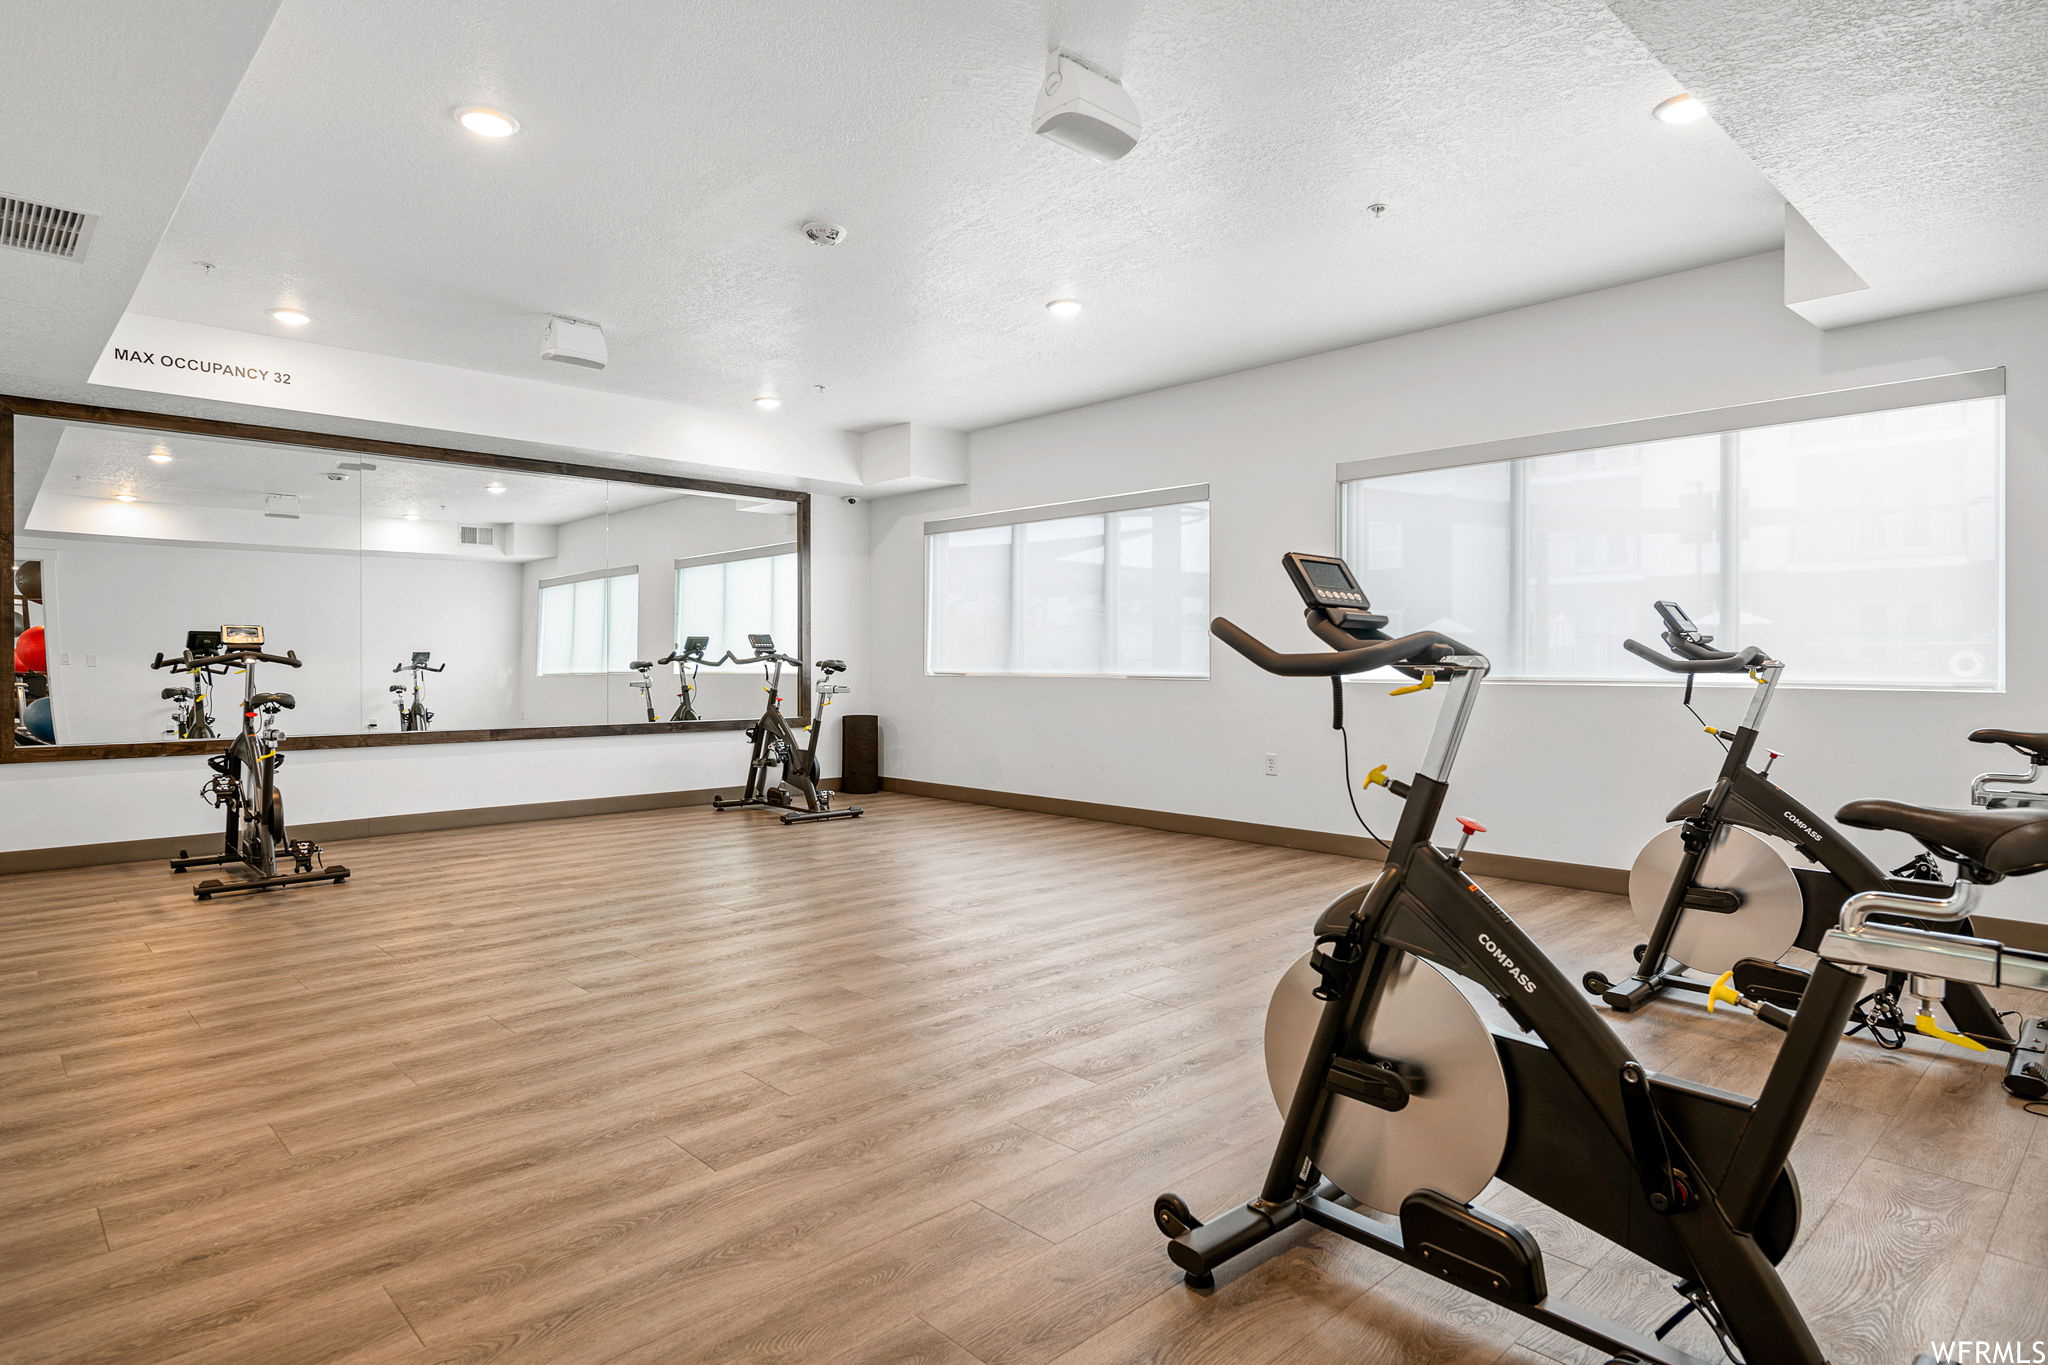 Workout area featuring light hardwood flooring and a textured ceiling